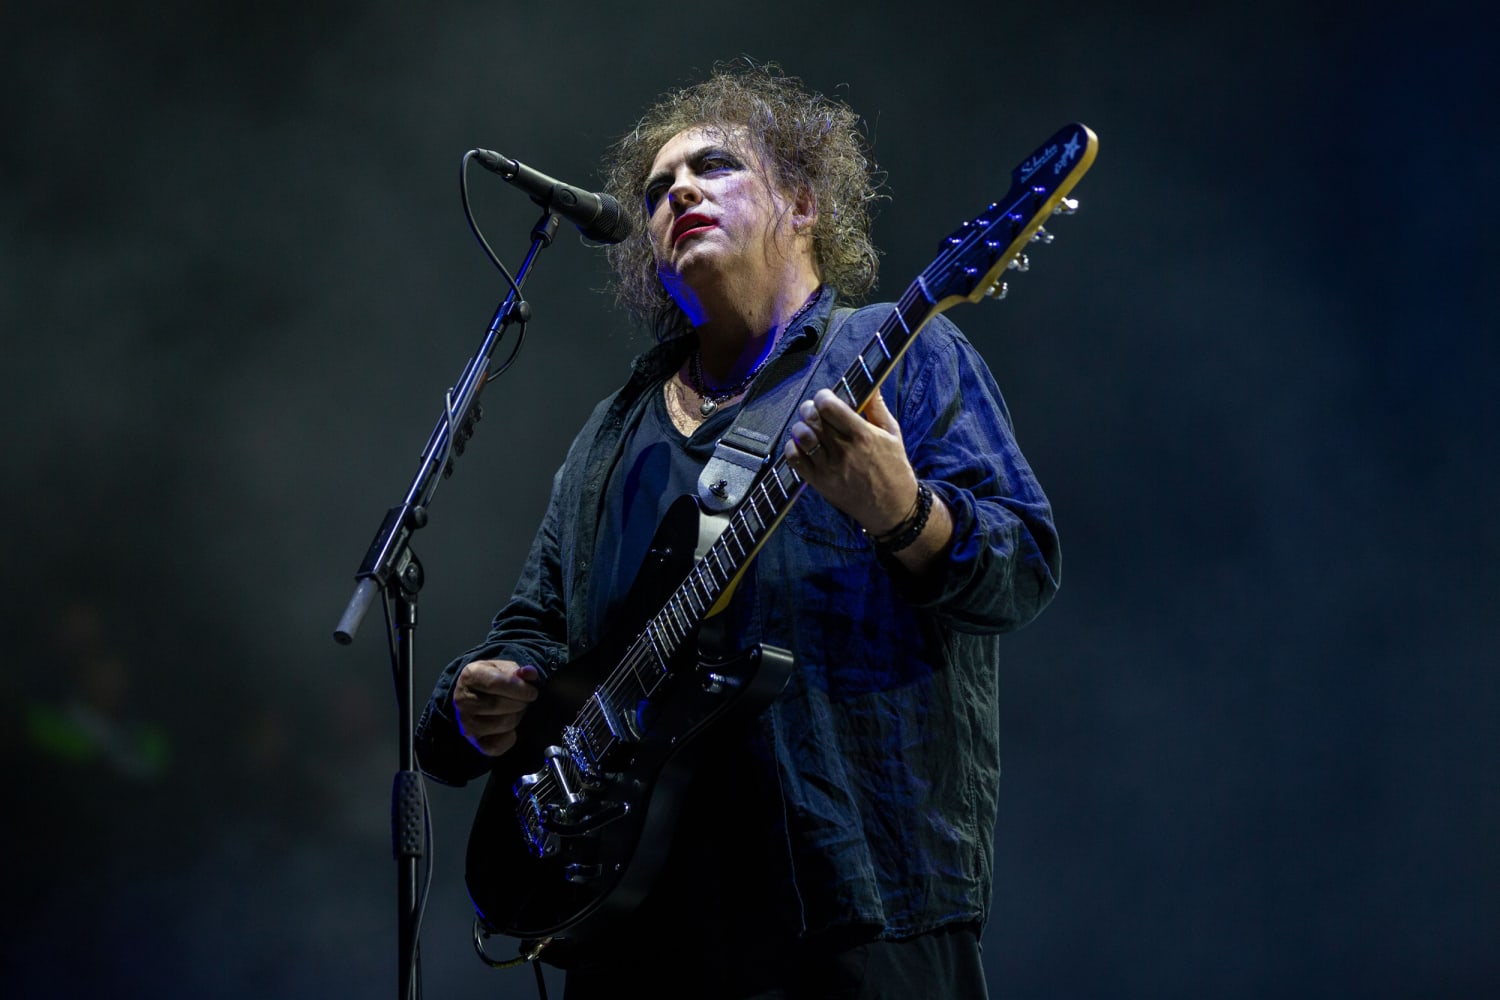 Ticketmaster to refund some fees after The Cure’s Robert Smith says he was 'sickened' by prices